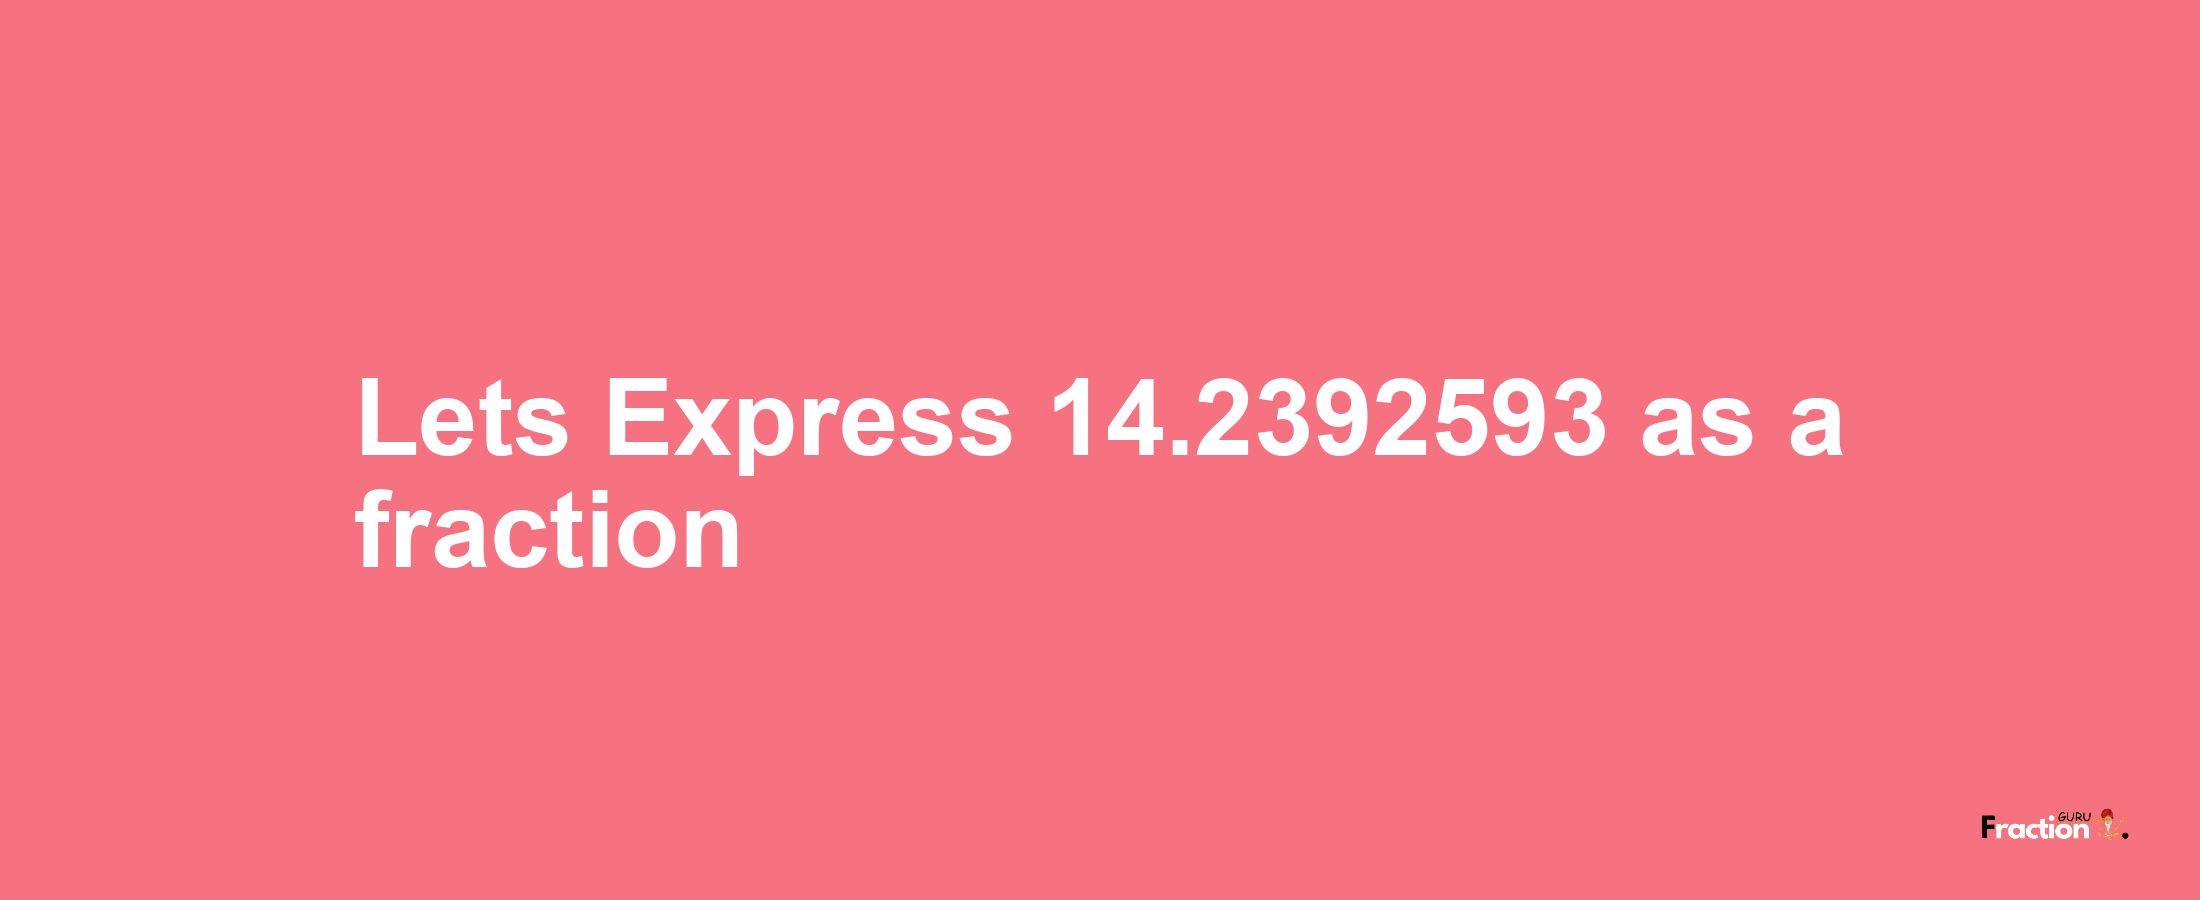 Lets Express 14.2392593 as afraction